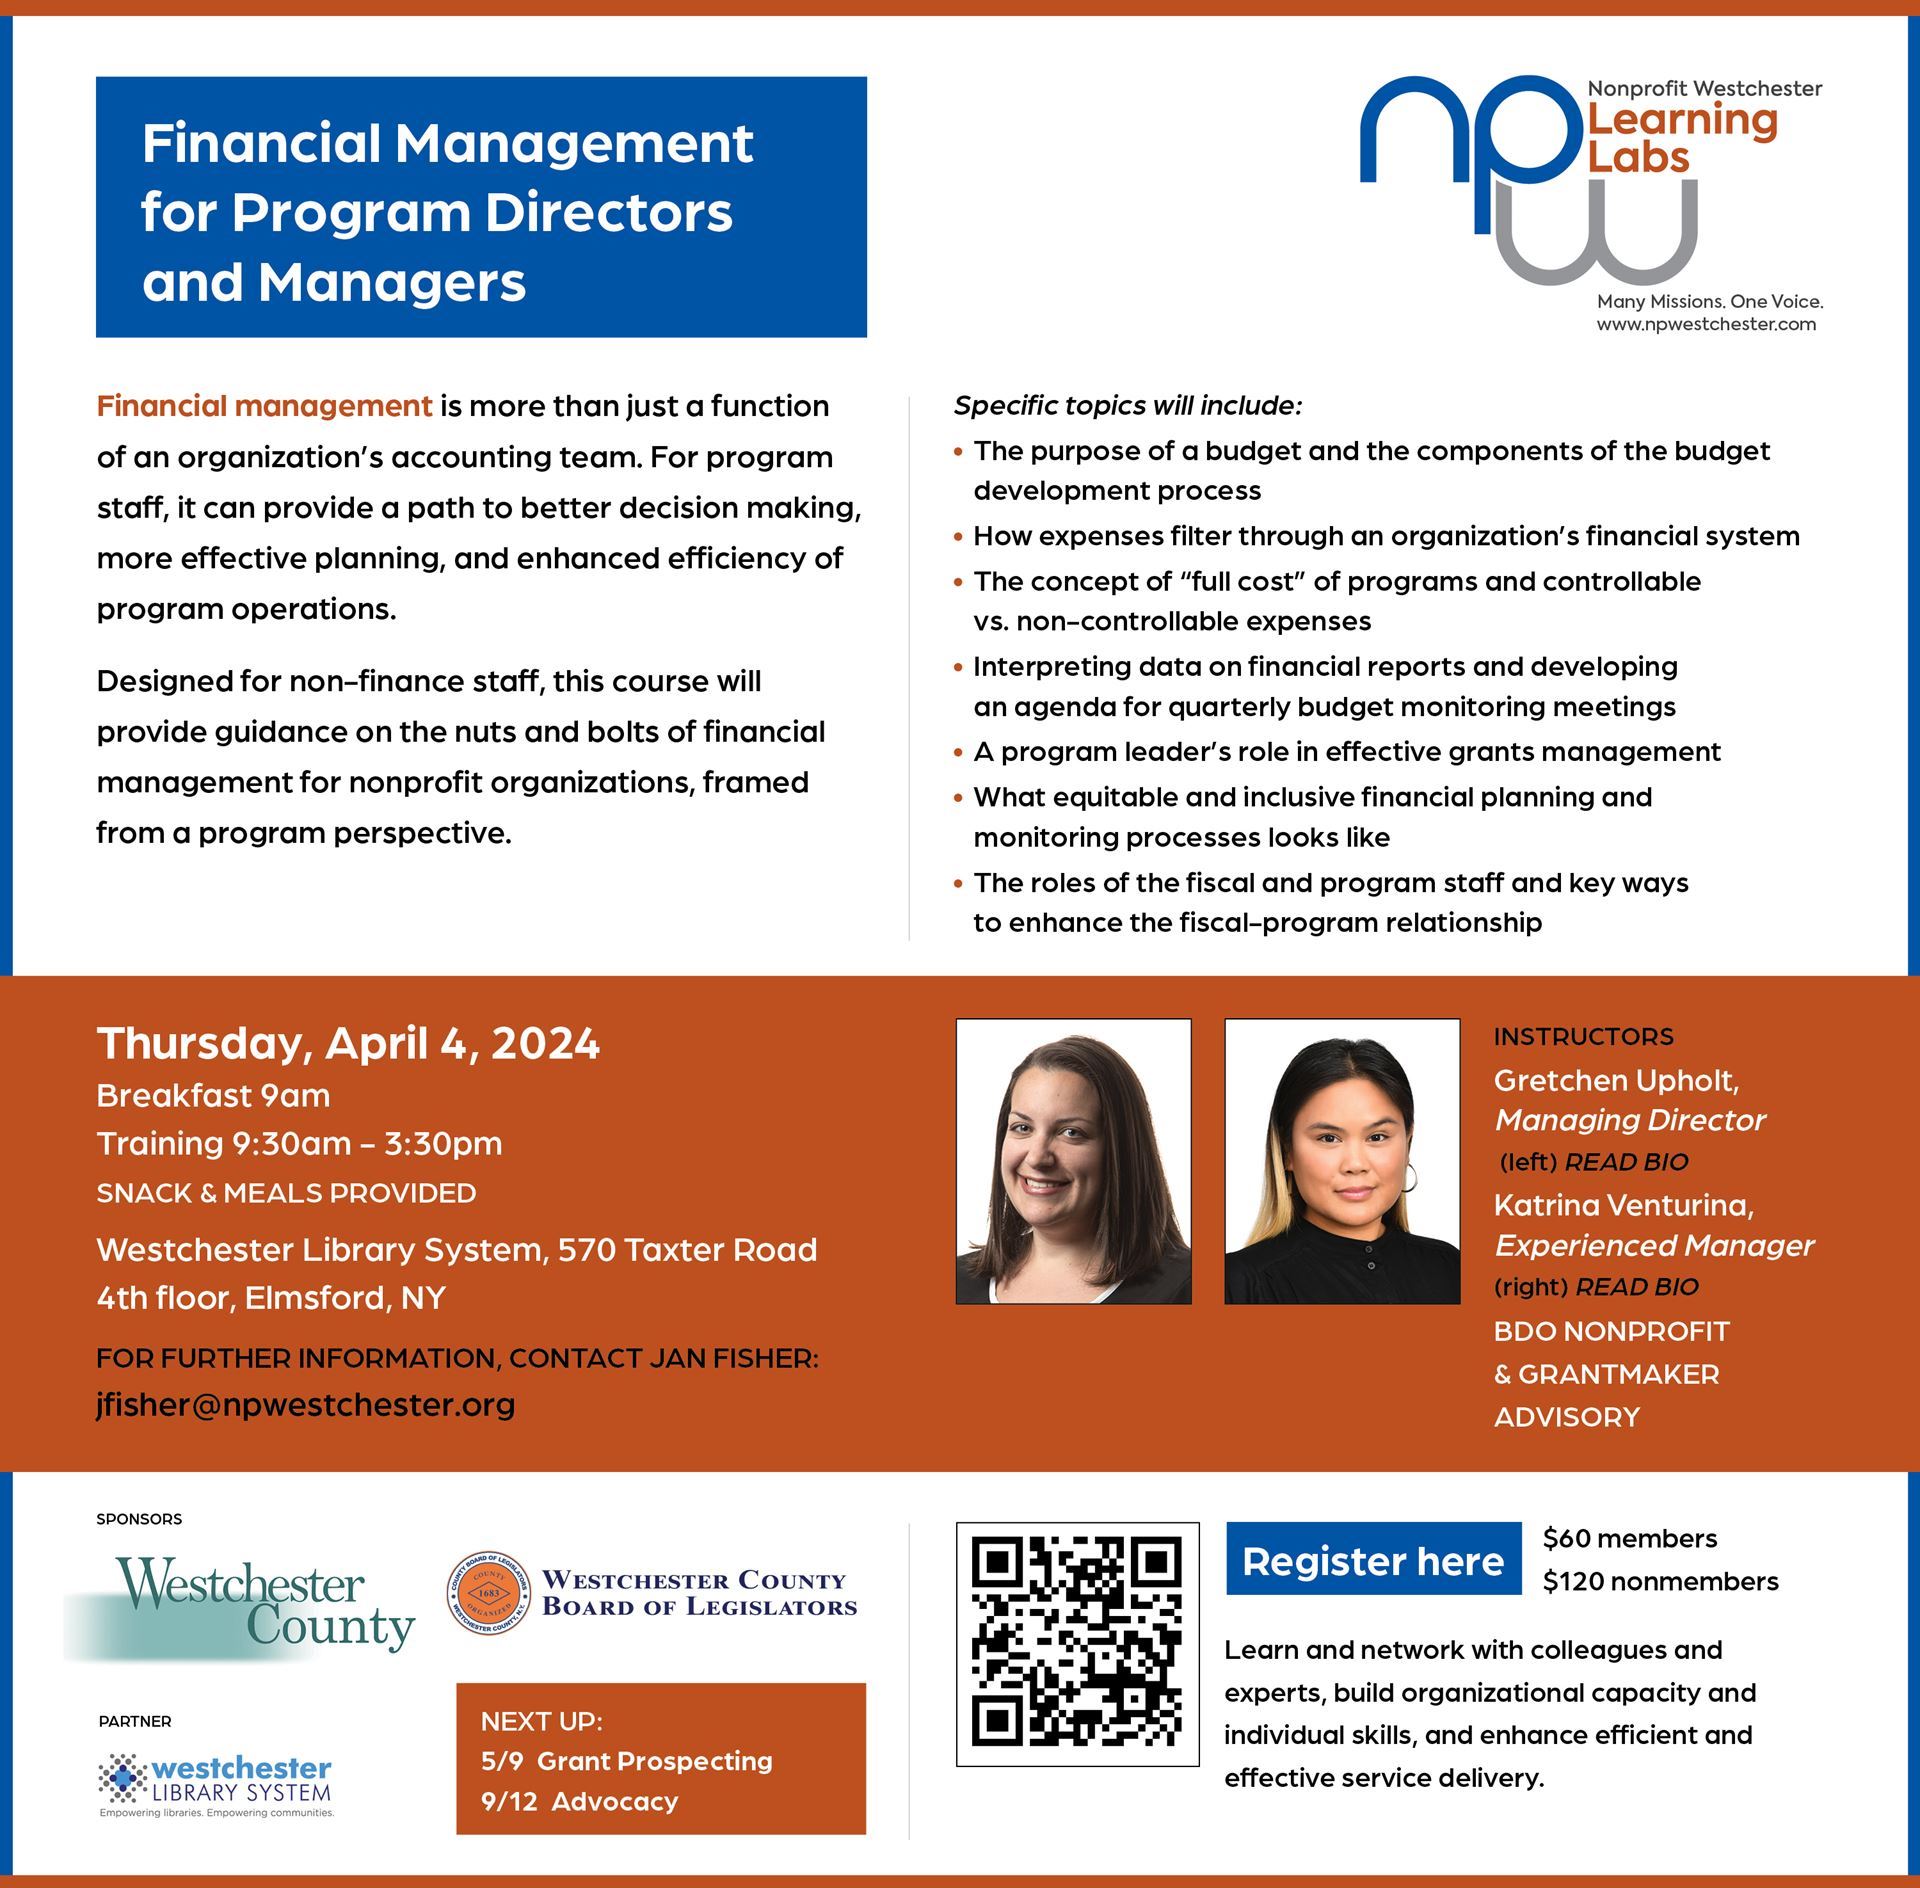 Flier for NPW's Financial Management Learning Lab for Program Directors and Managers on April 4th. Full-day training course with instructors from BDO.